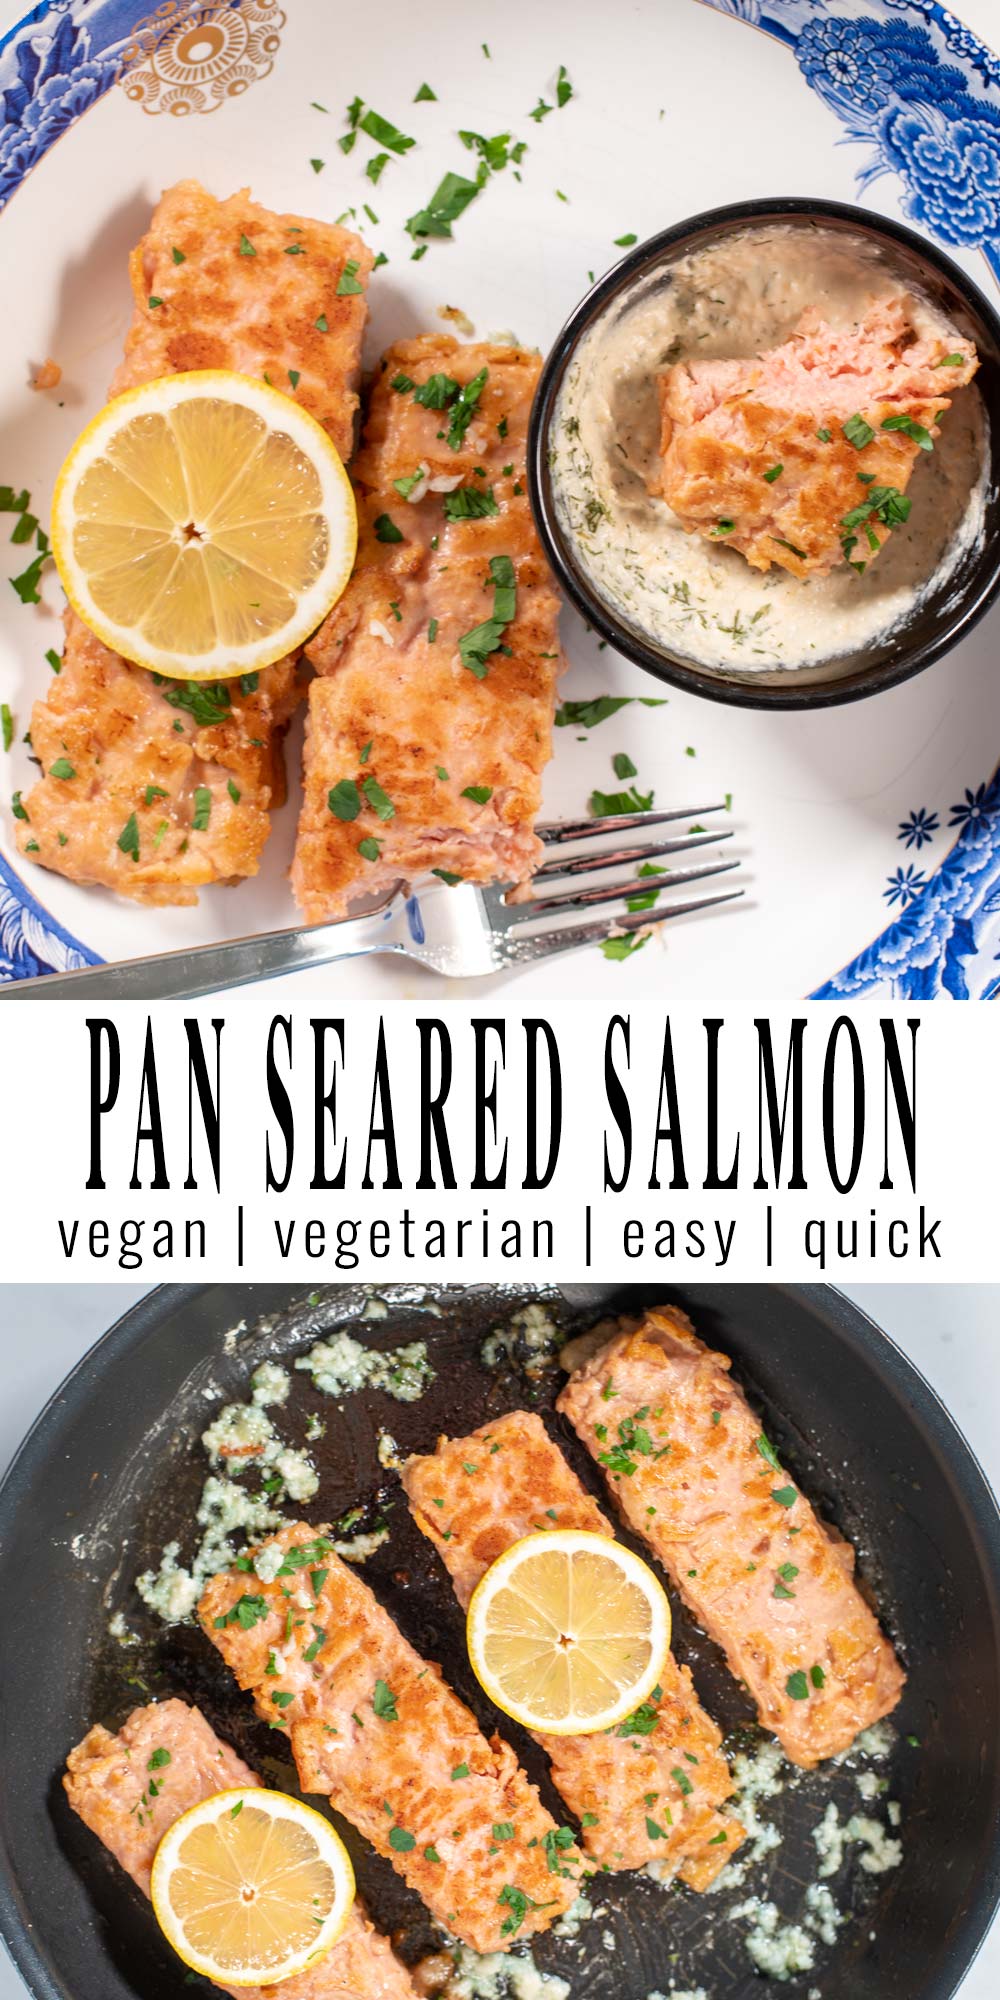 Collage of two photos of Pan Seared Salmon with recipe title text.